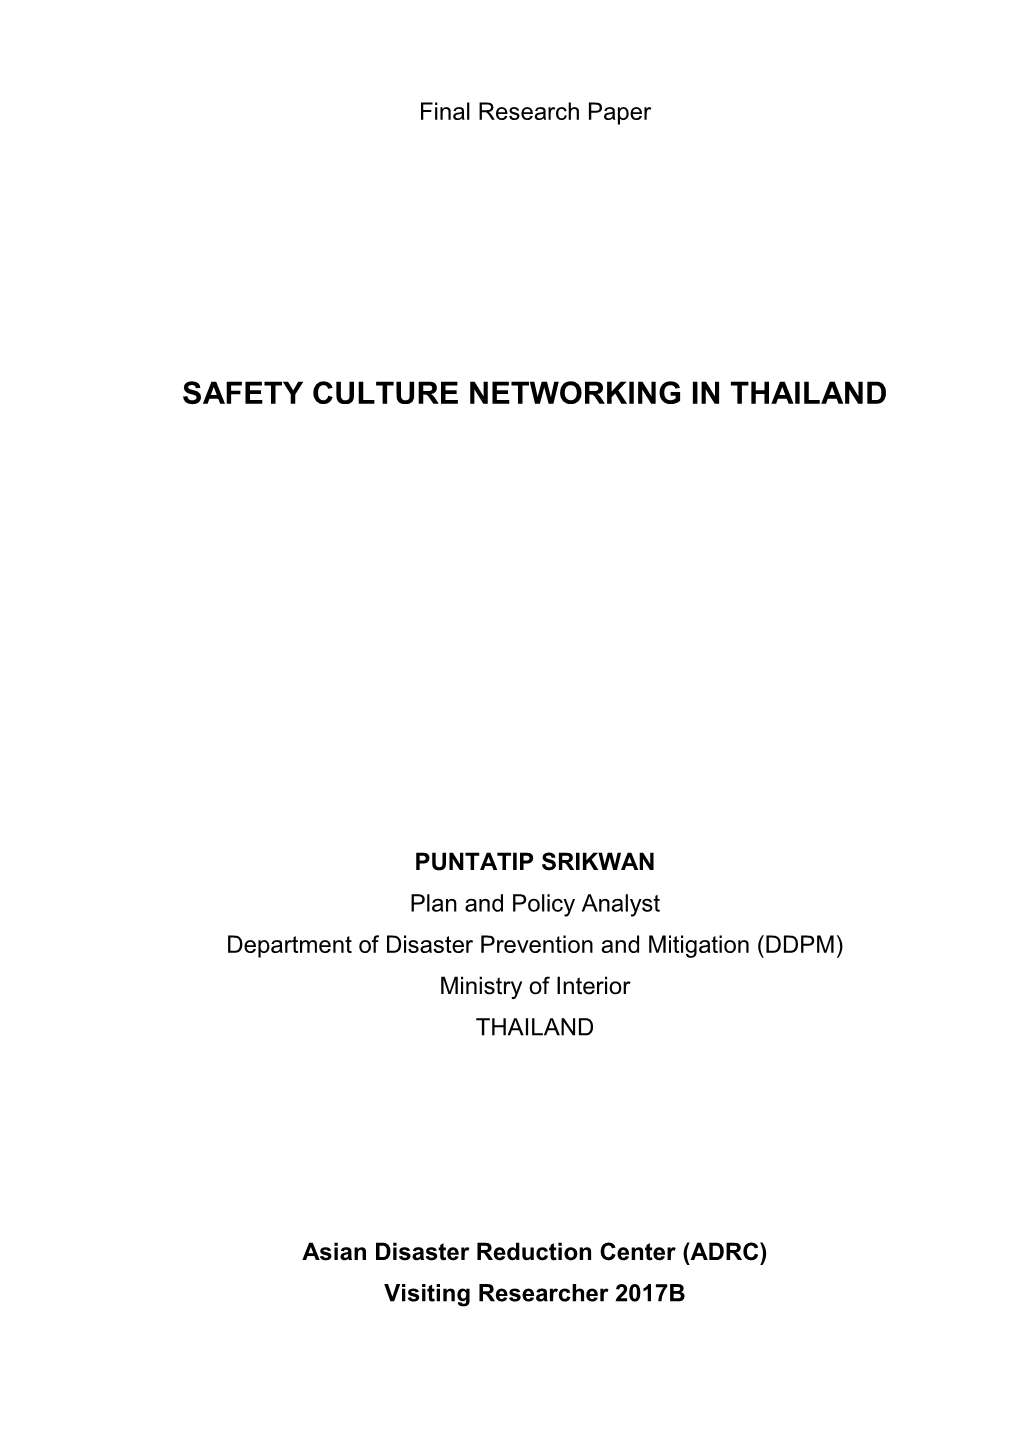 Safety Culture Networking in Thailand